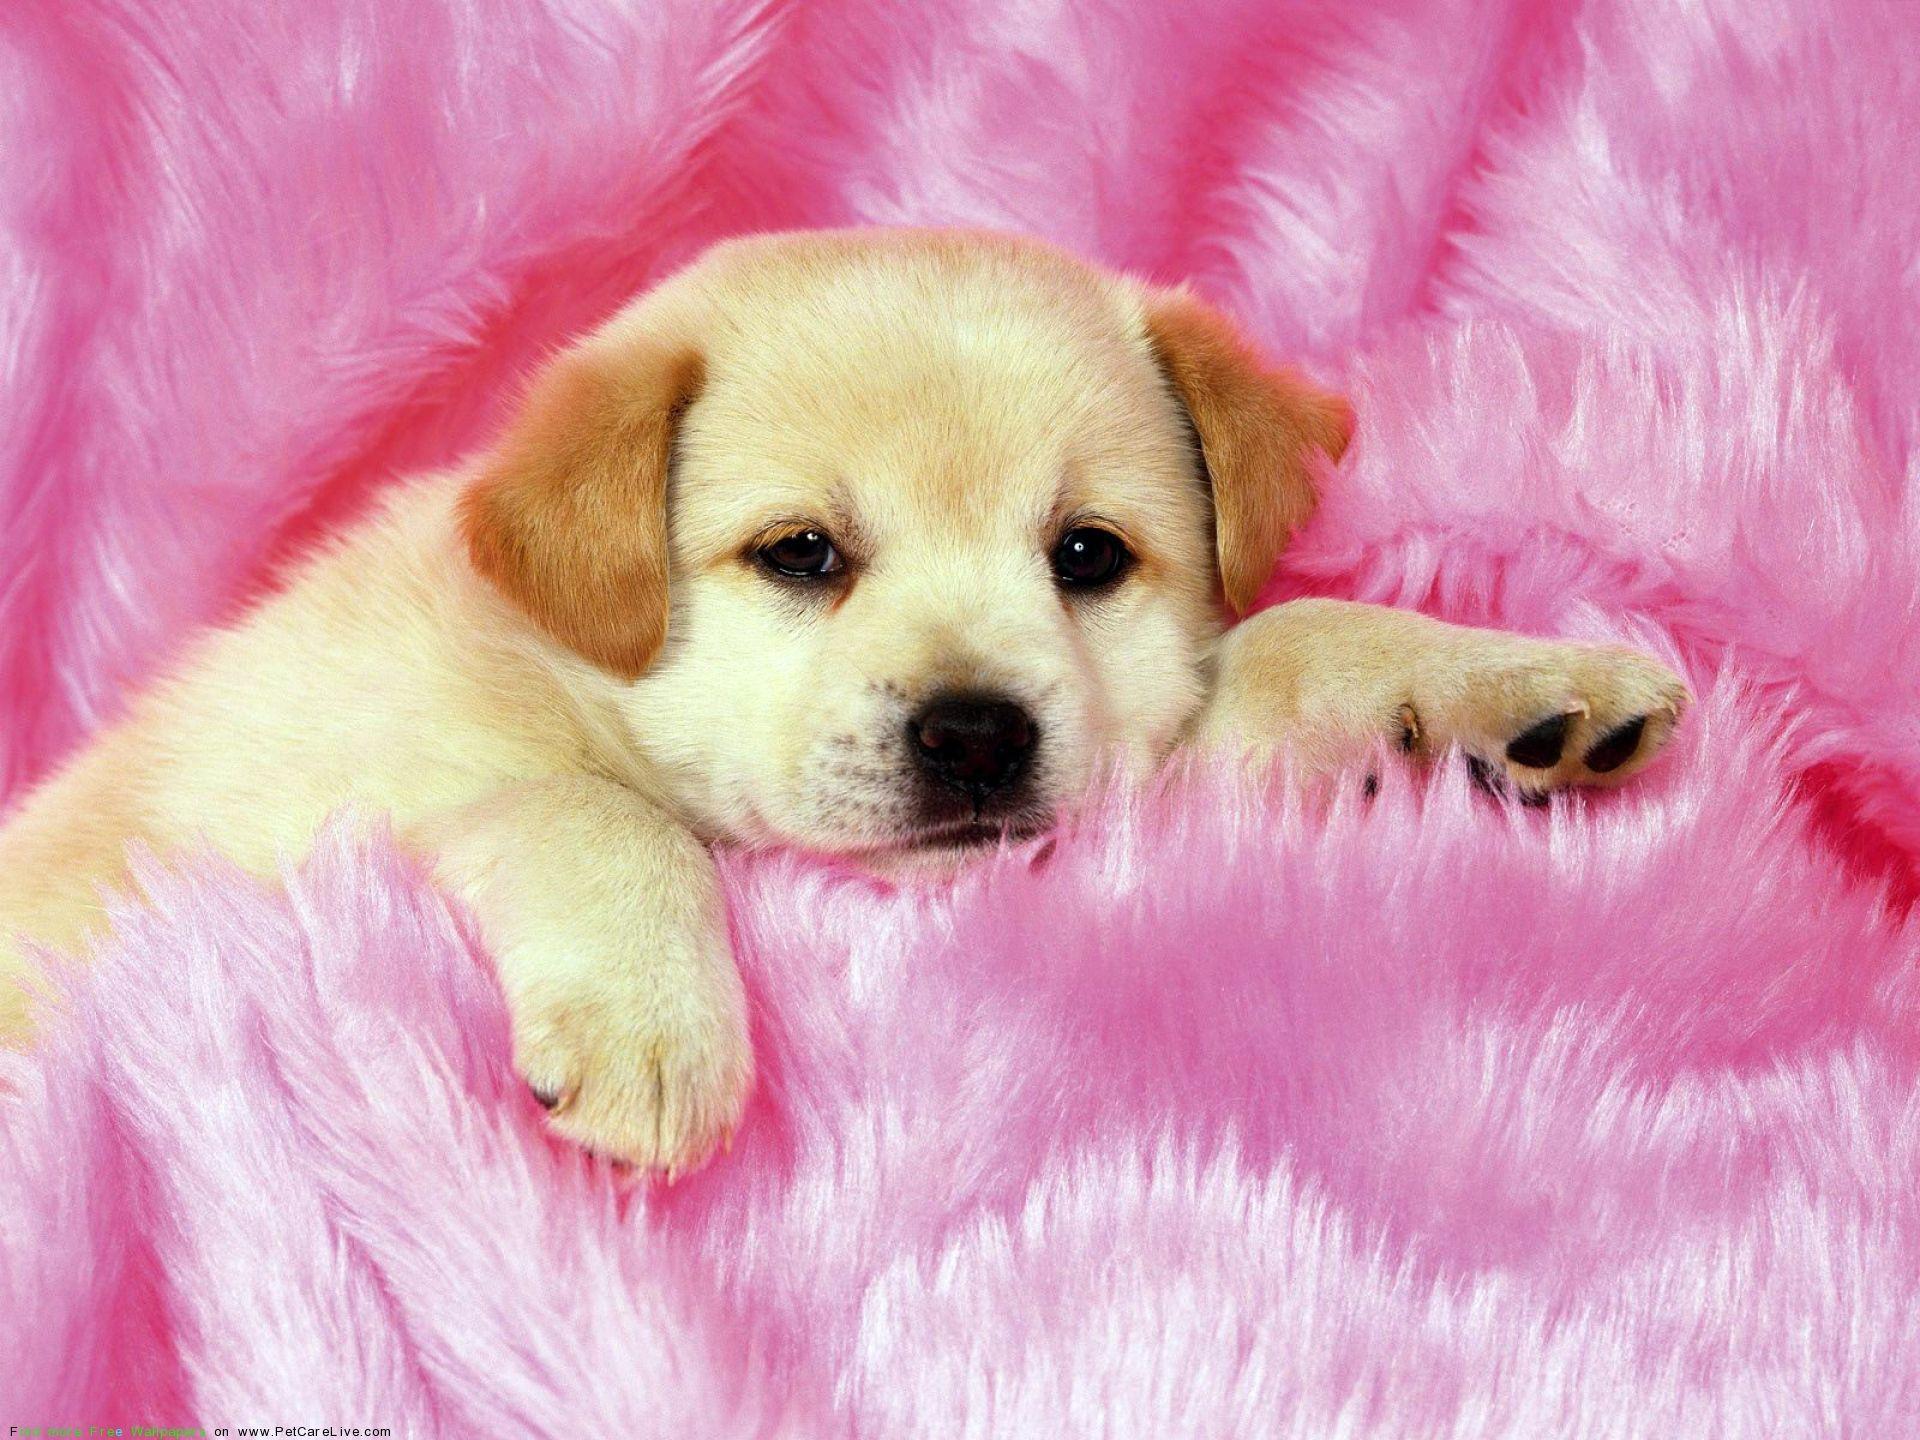 Astonishing Cute Puppies Wallpaper Background Puppies Wallpaper Wallpaper Free Download Hd Desk. Cute Dog Wallpaper, Cute Puppy Wallpaper, Cute Dogs And Puppies